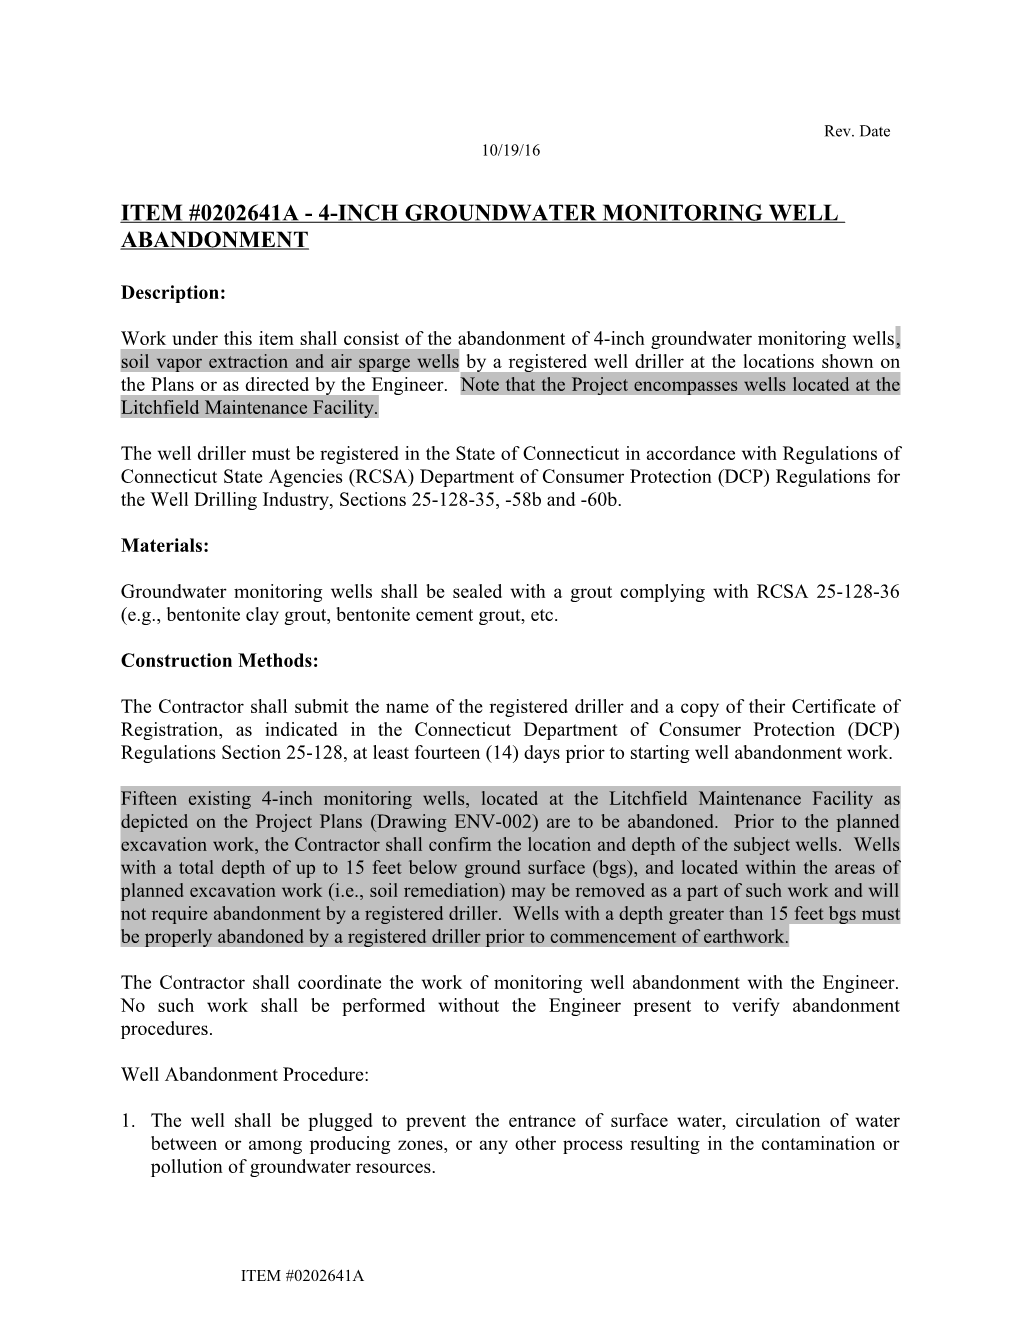 ITEM #0202641A - 4-Inchgroundwater MONITORING WELL ABANDONMENT